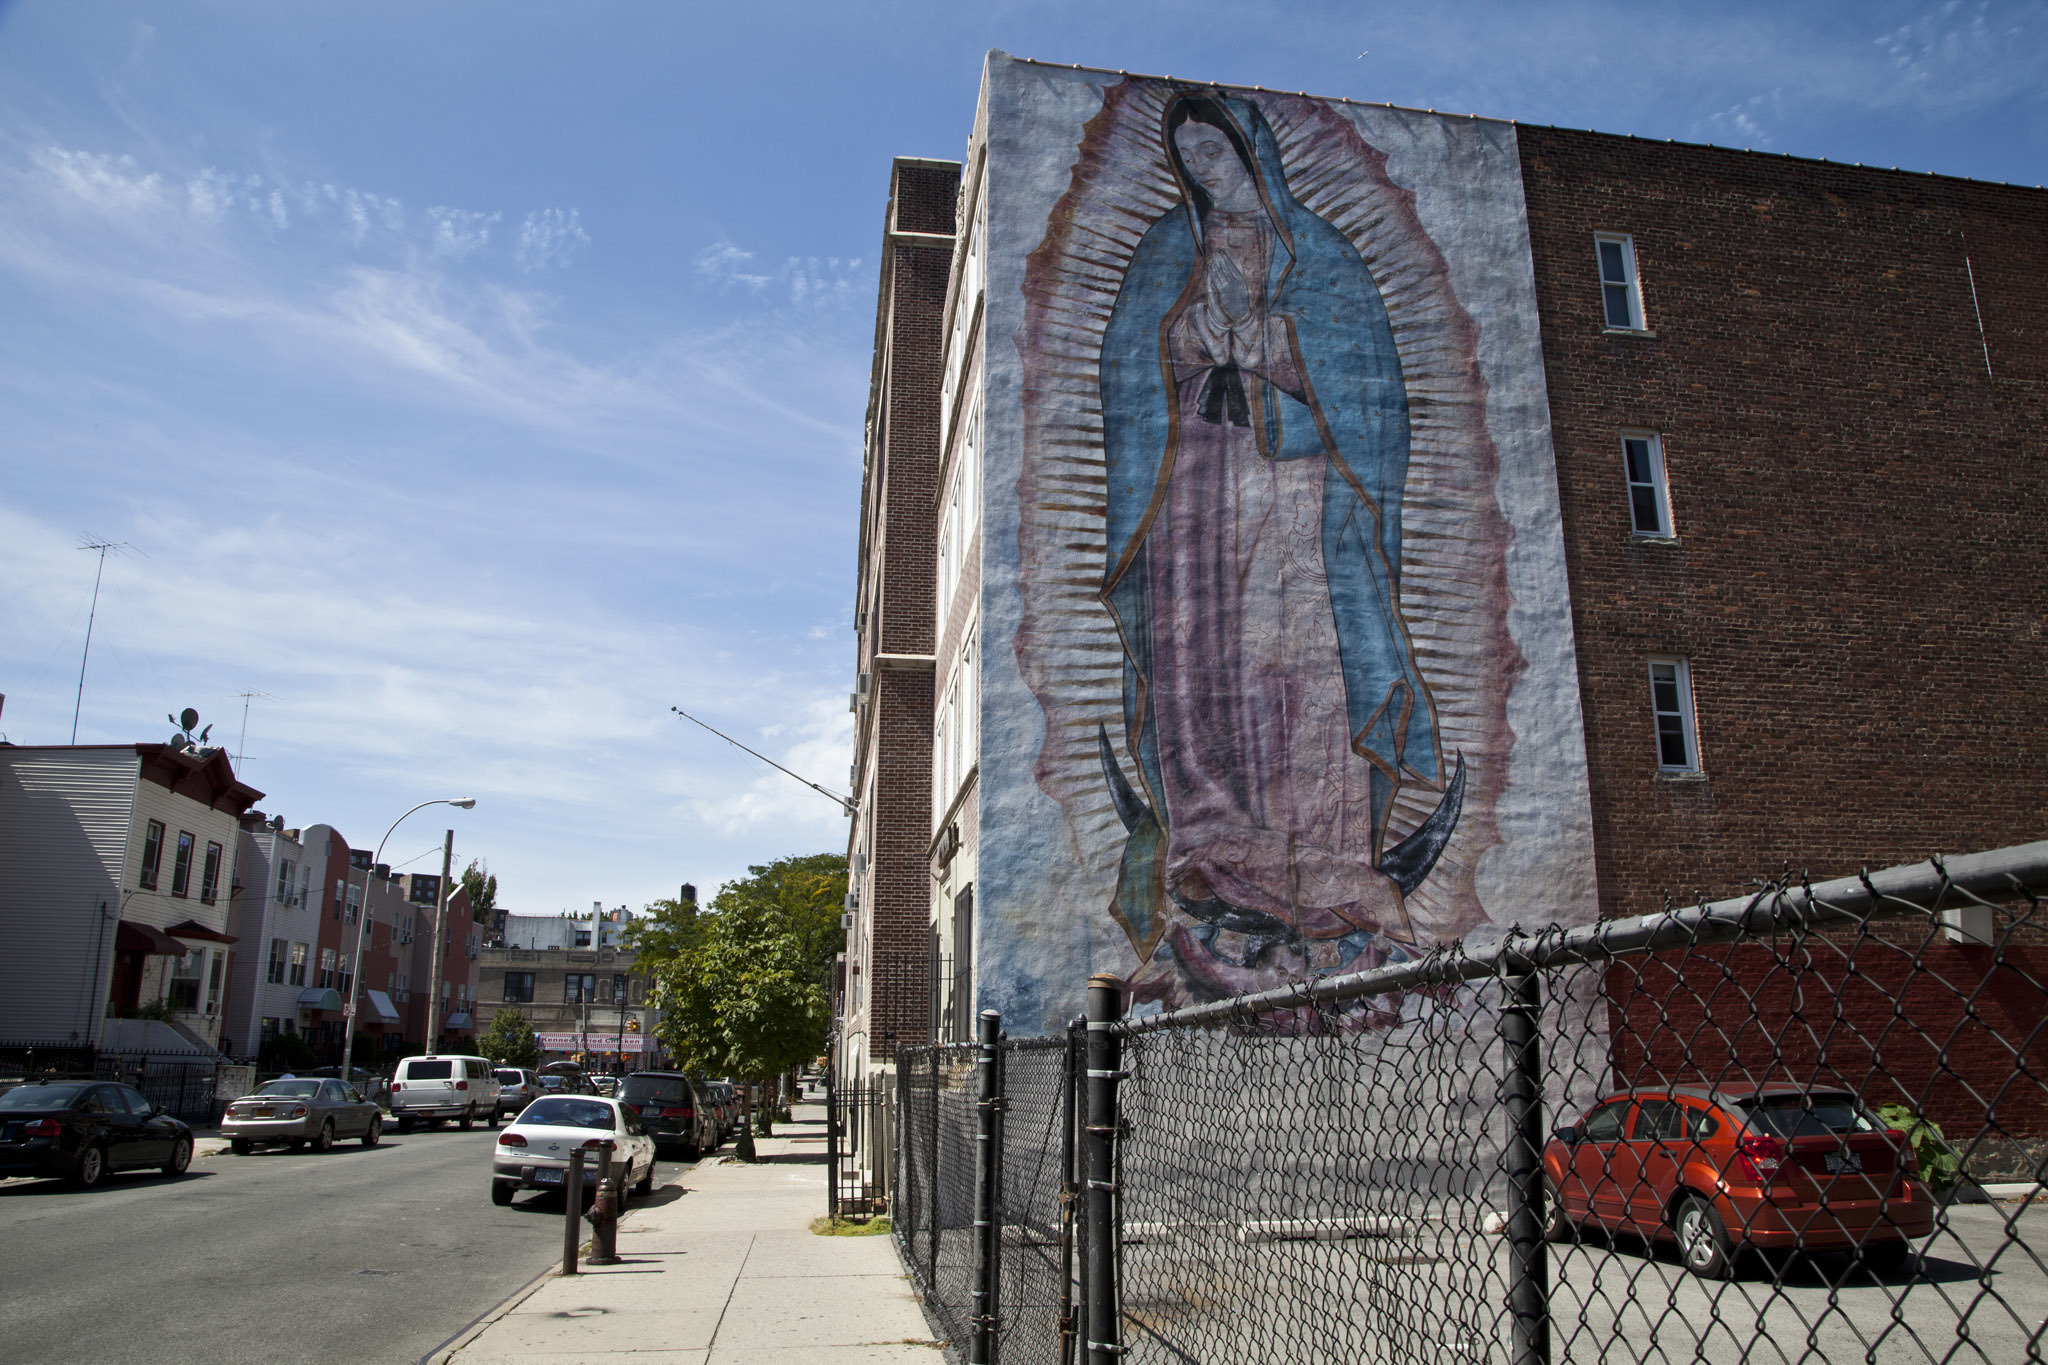 South Bronx guide: A day in the Hub, Bronx